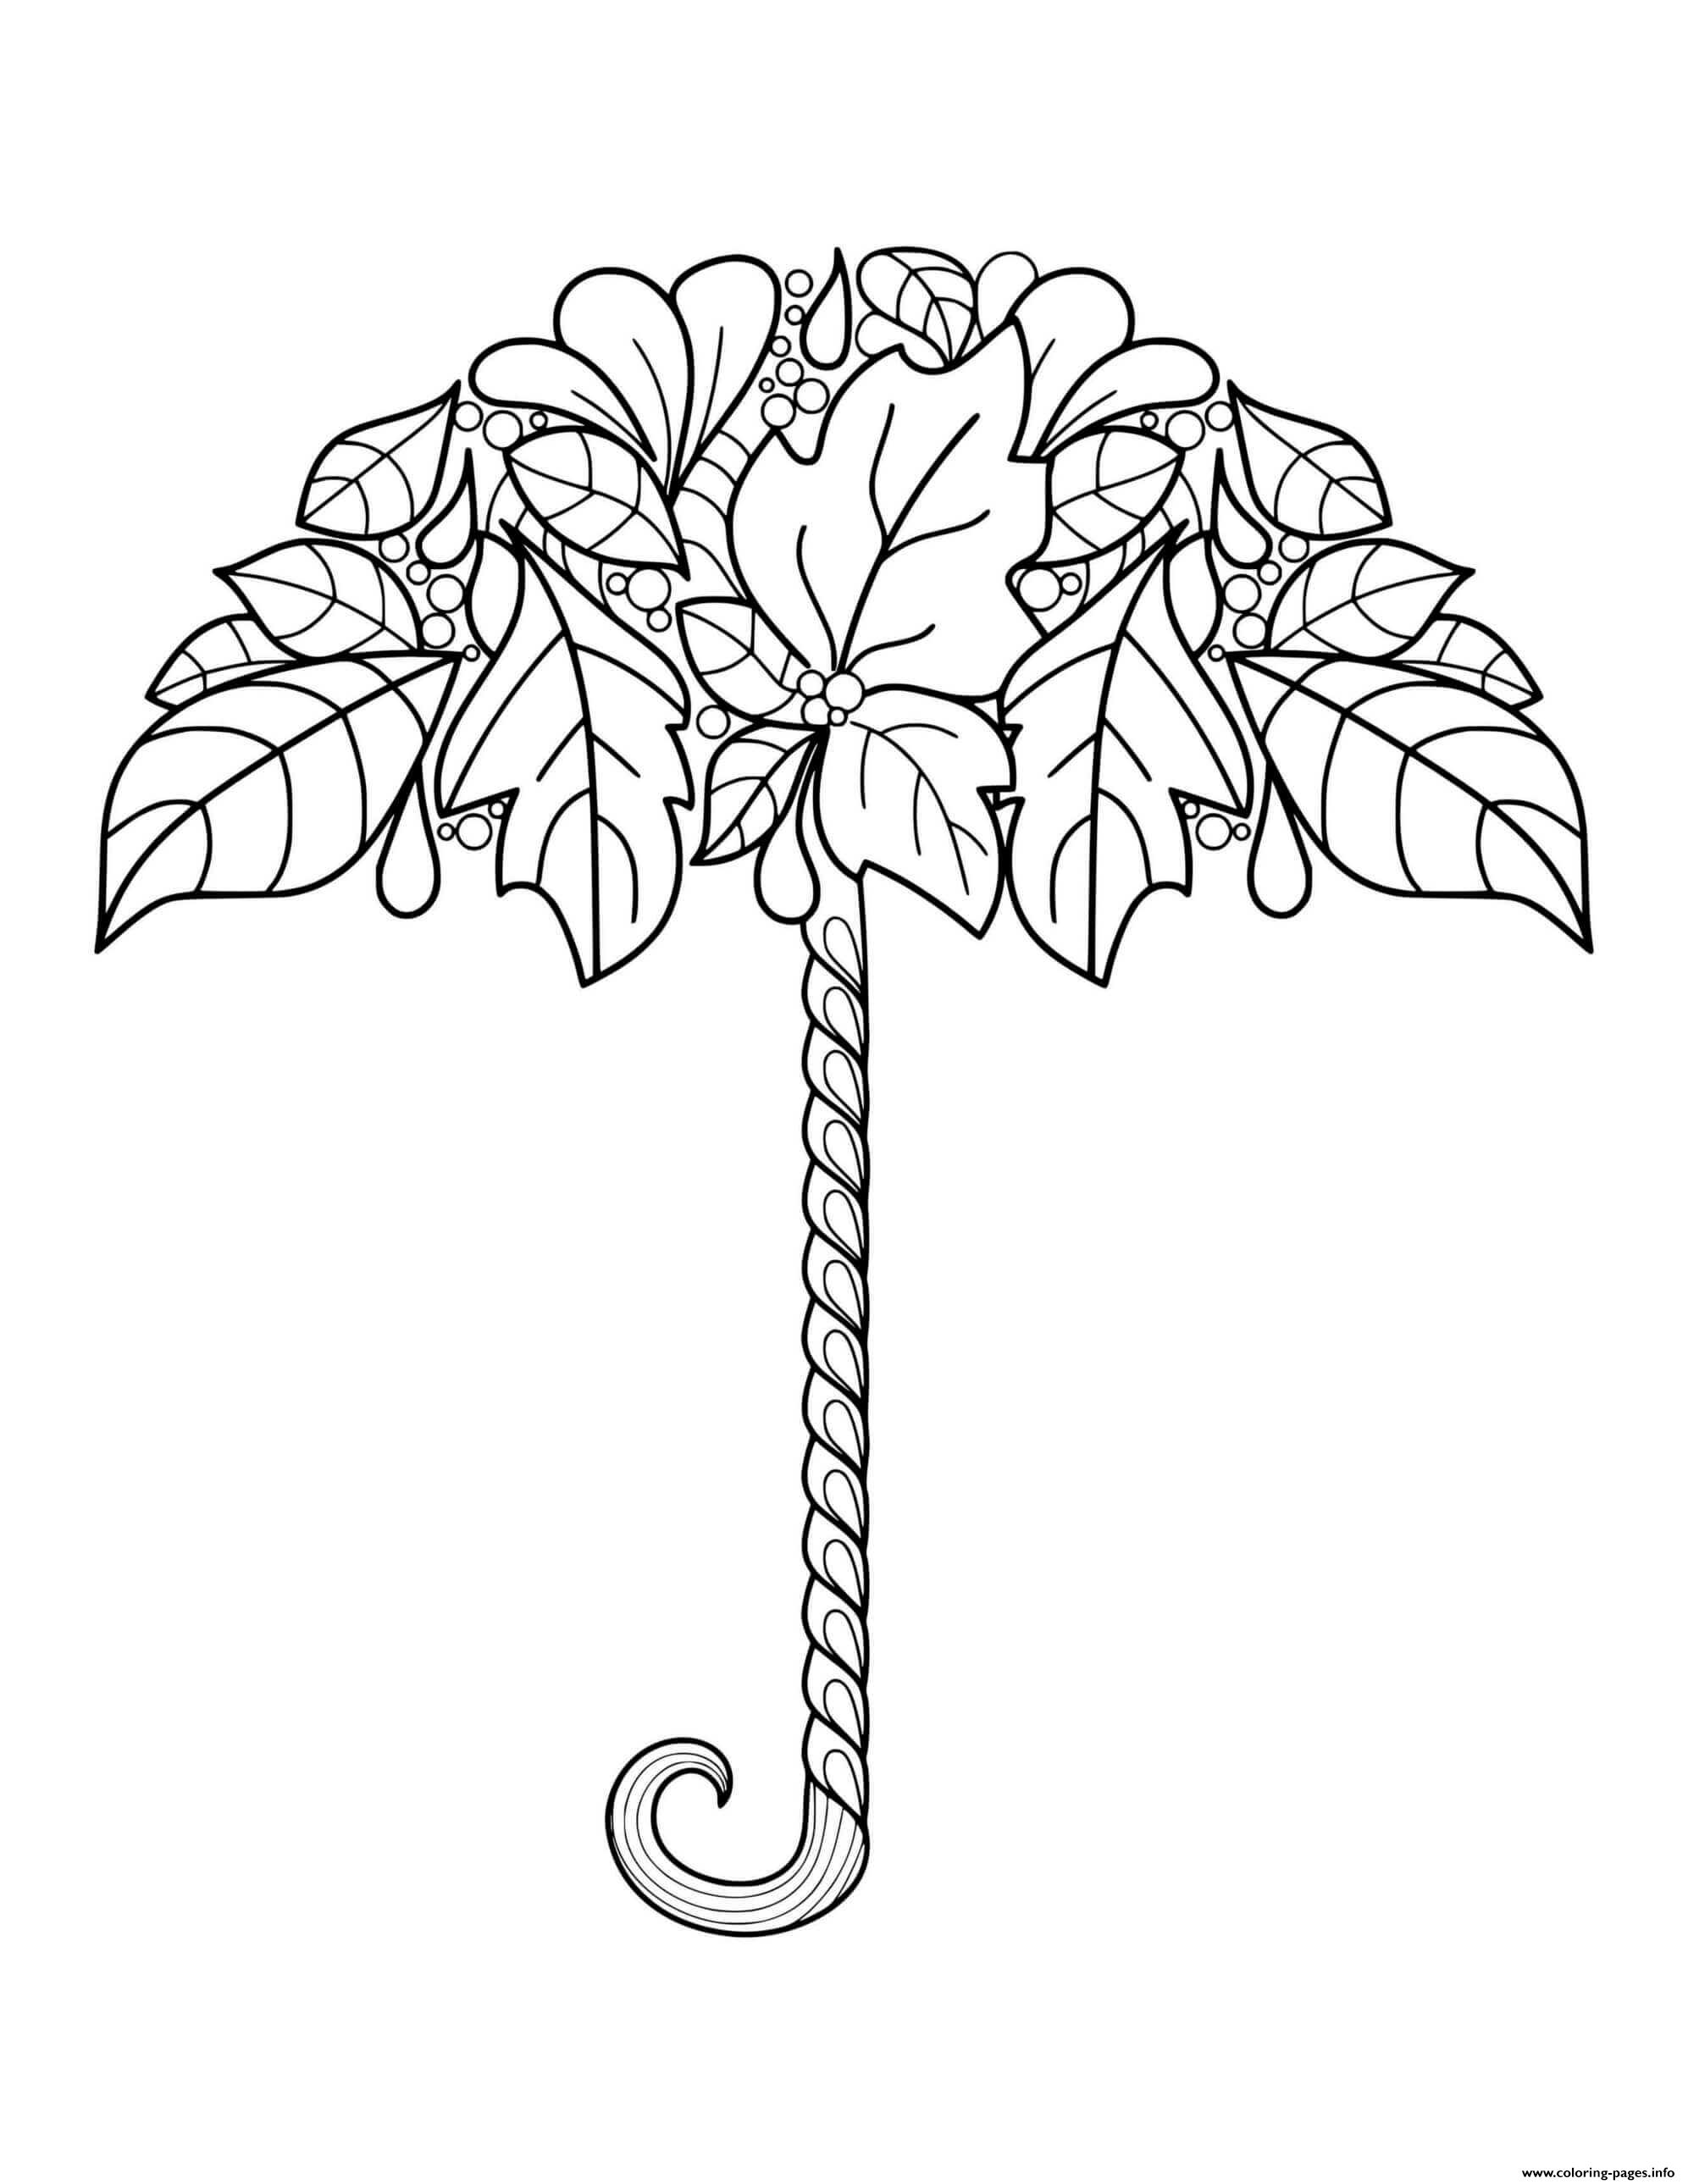 Leaf Coloring Pages For Adults